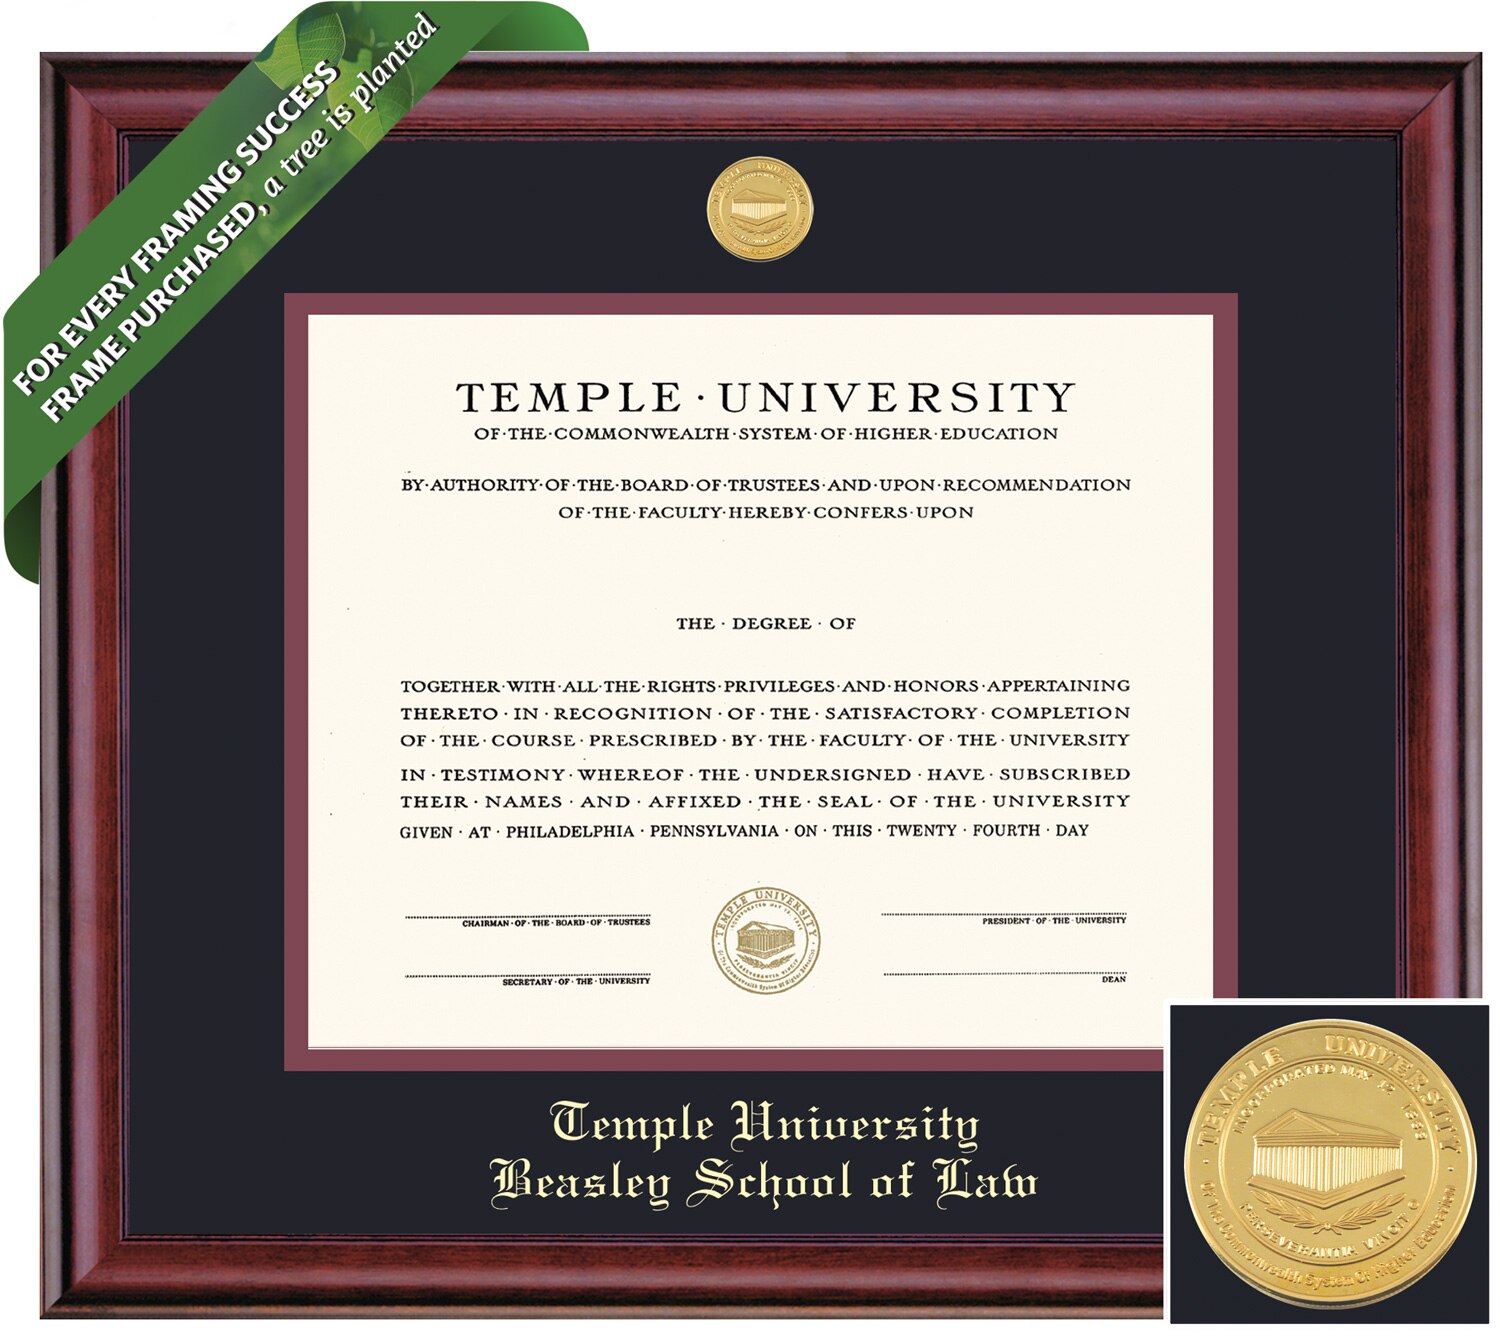 Framing Success 11 x 14 Classic Gold Medallion Law Diploma Frame